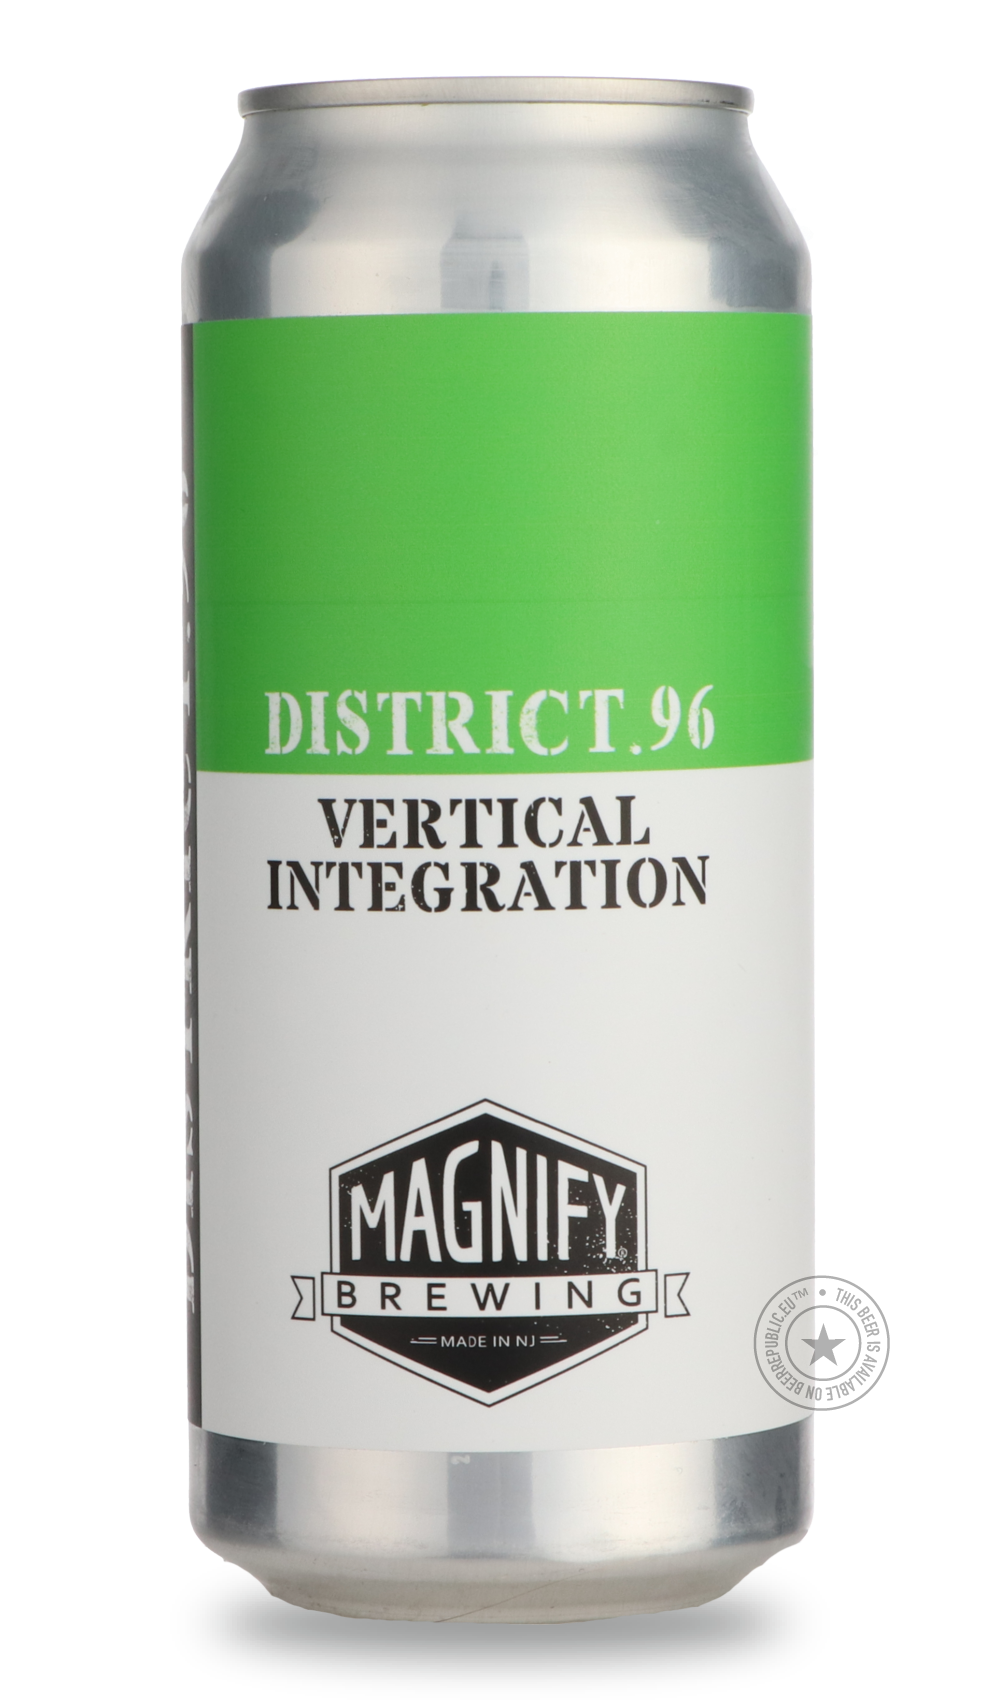 -Magnify- Vertical Integration / District 96-IPA- Only @ Beer Republic - The best online beer store for American & Canadian craft beer - Buy beer online from the USA and Canada - Bier online kopen - Amerikaans bier kopen - Craft beer store - Craft beer kopen - Amerikanisch bier kaufen - Bier online kaufen - Acheter biere online - IPA - Stout - Porter - New England IPA - Hazy IPA - Imperial Stout - Barrel Aged - Barrel Aged Imperial Stout - Brown - Dark beer - Blond - Blonde - Pilsner - Lager - Wheat - Weize